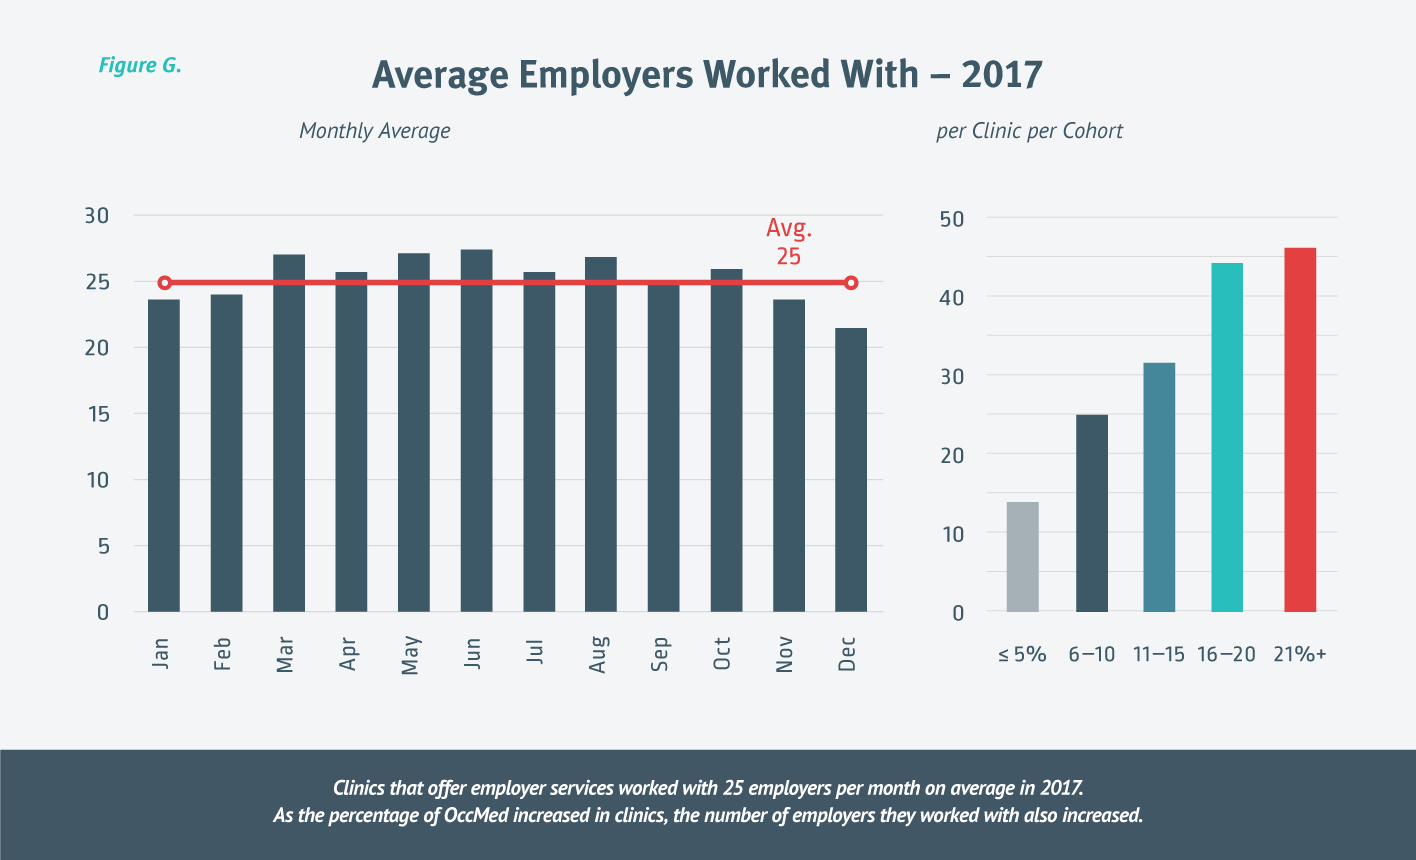 Chart showing the average employers worked with - 2017